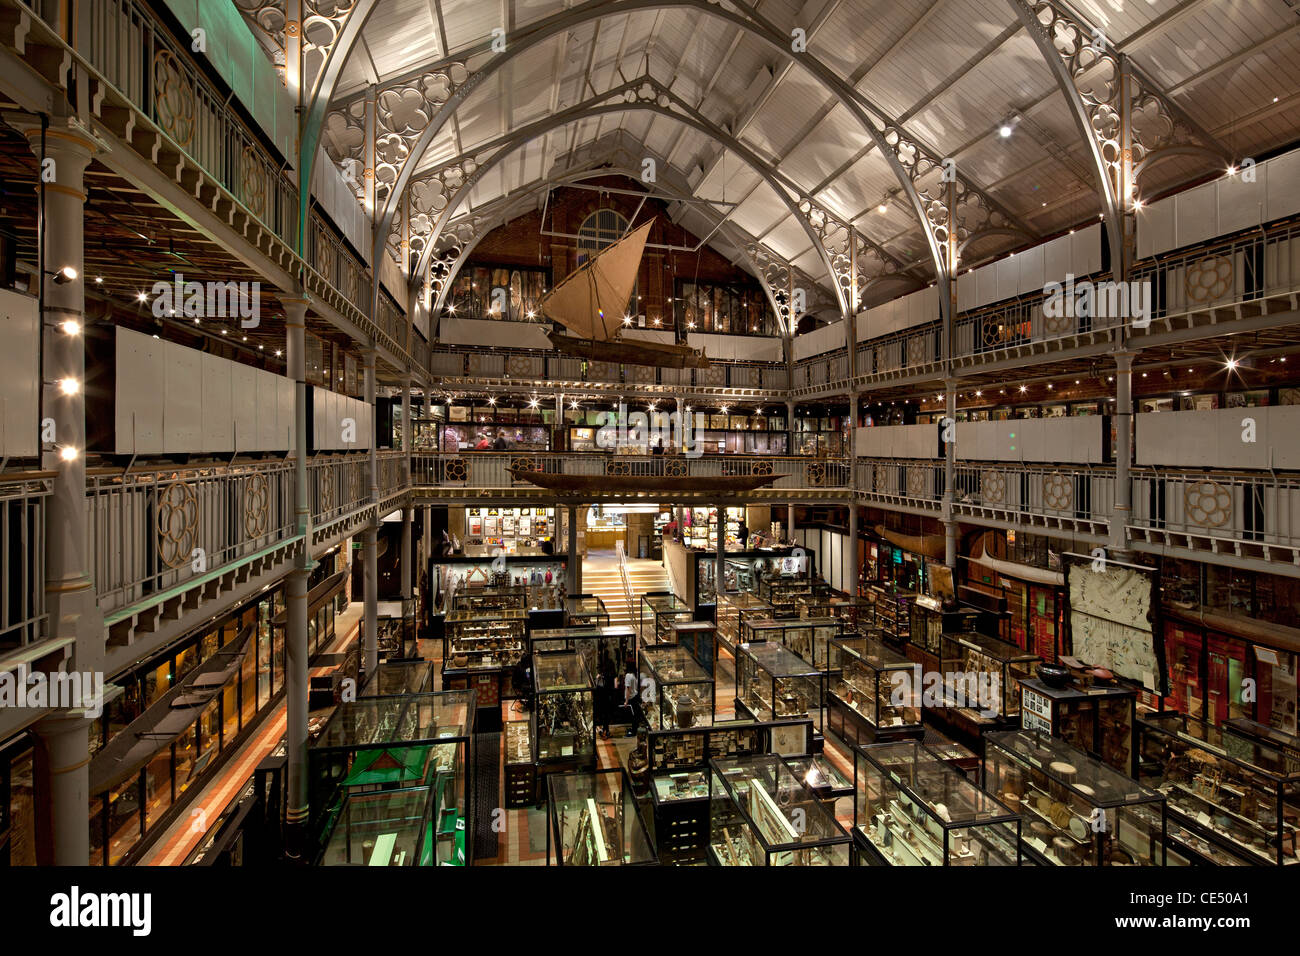 Pitt Rivers Museum, Oxford, Angleterre Banque D'Images